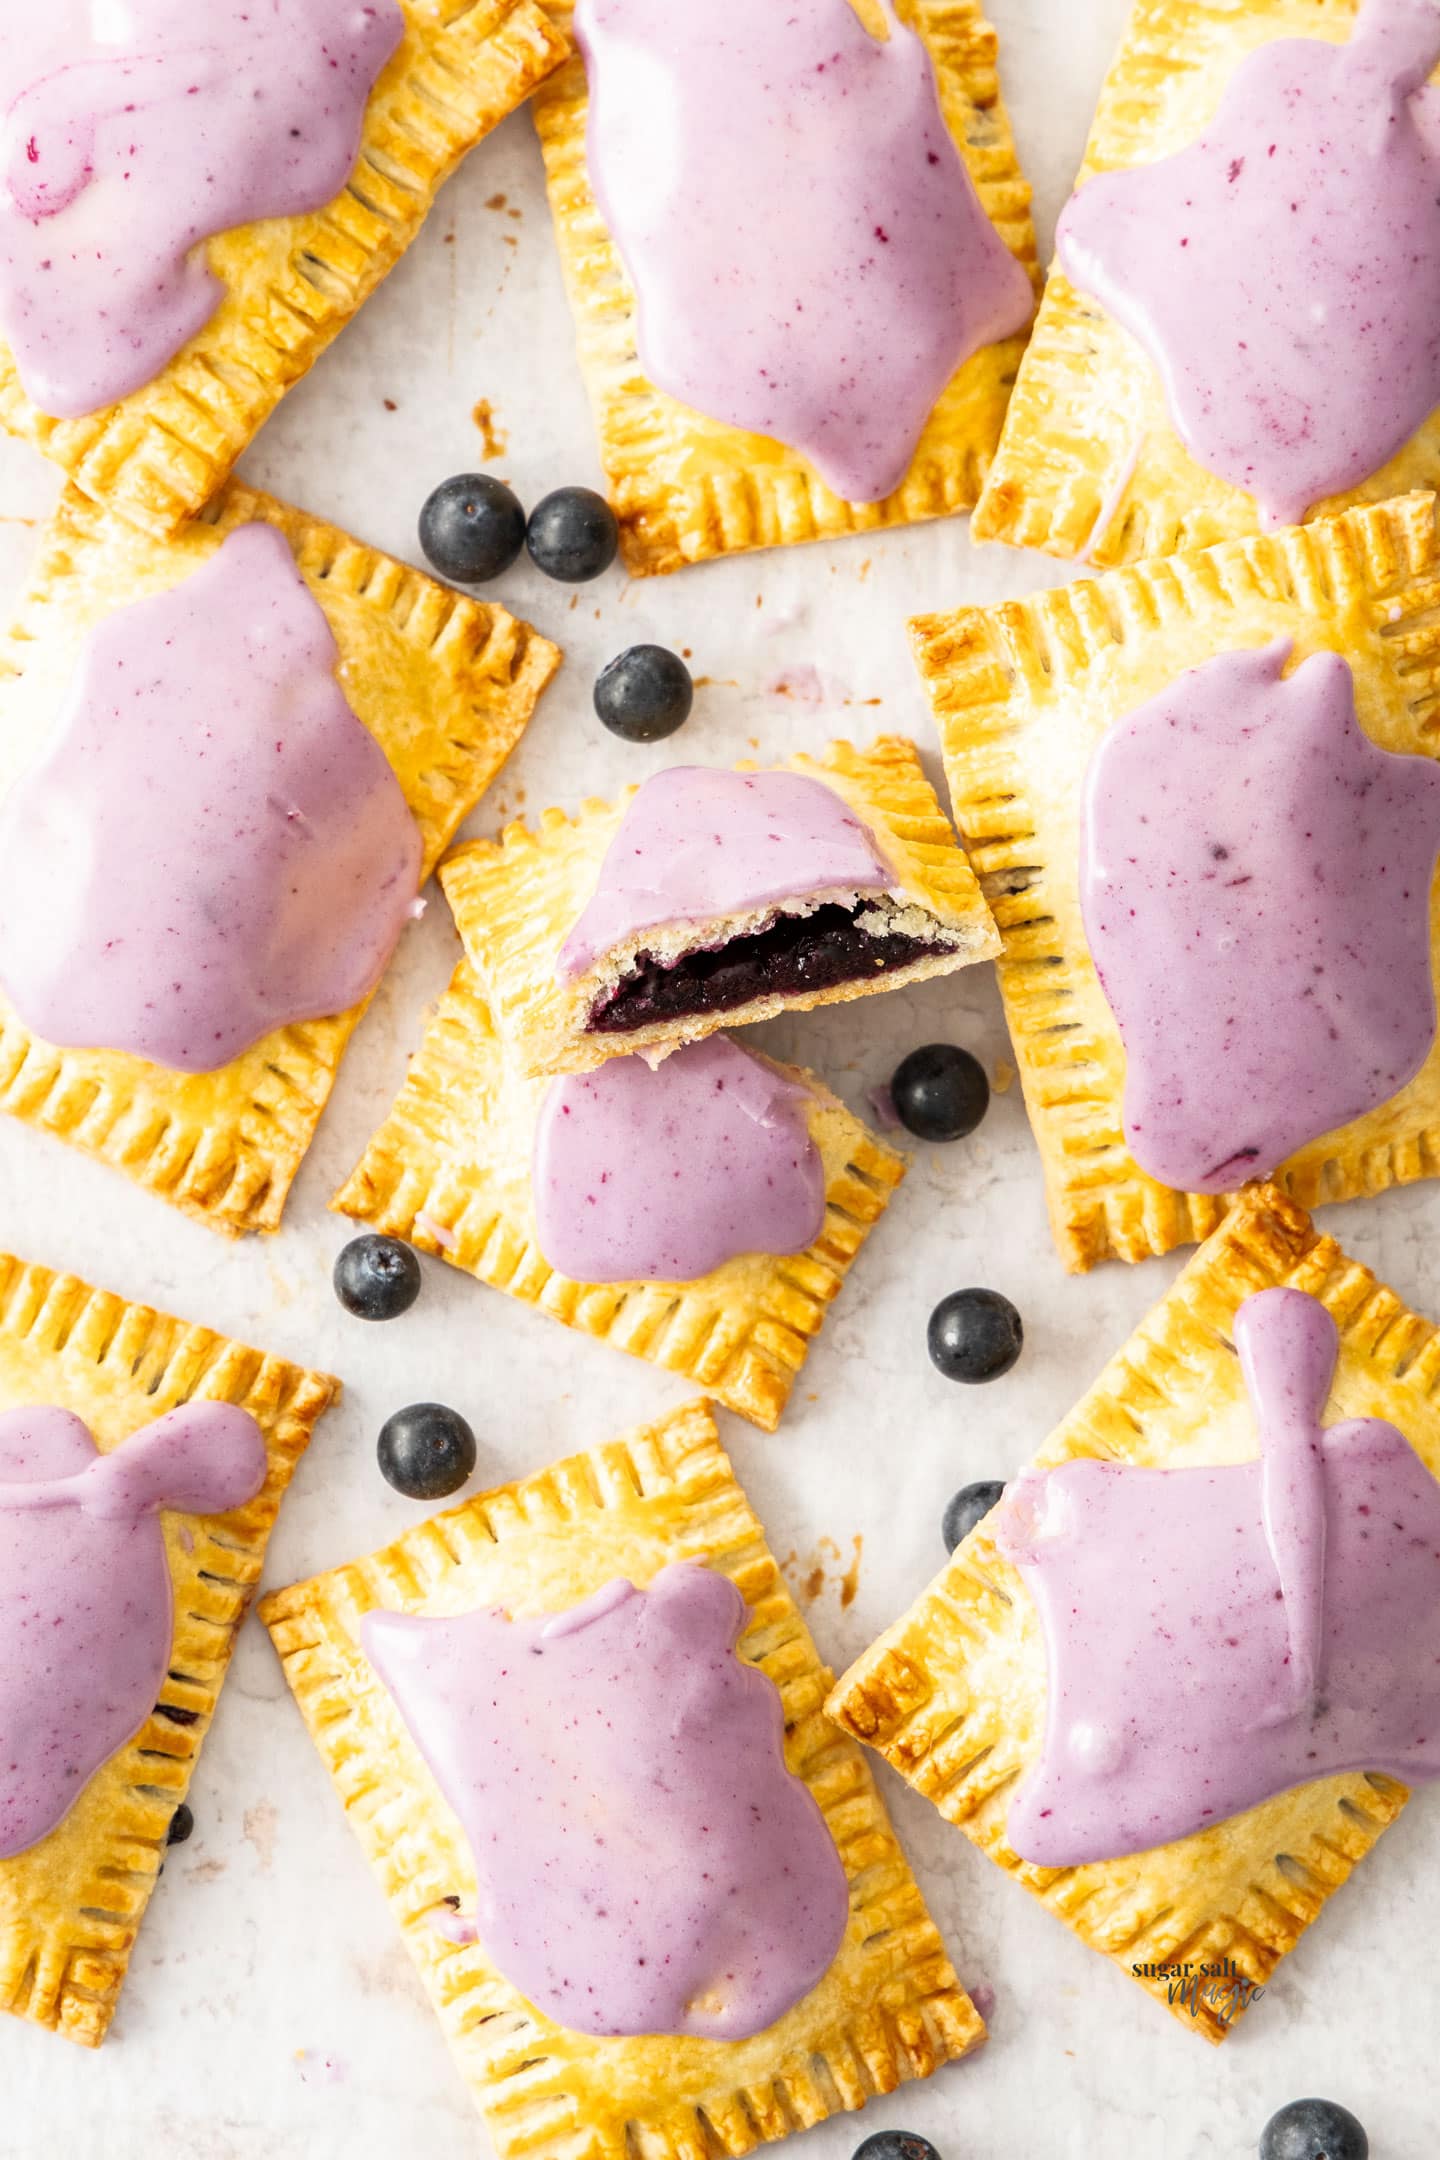 Top down view of a batch of 9 blueberry pop tarts with one cut in half.